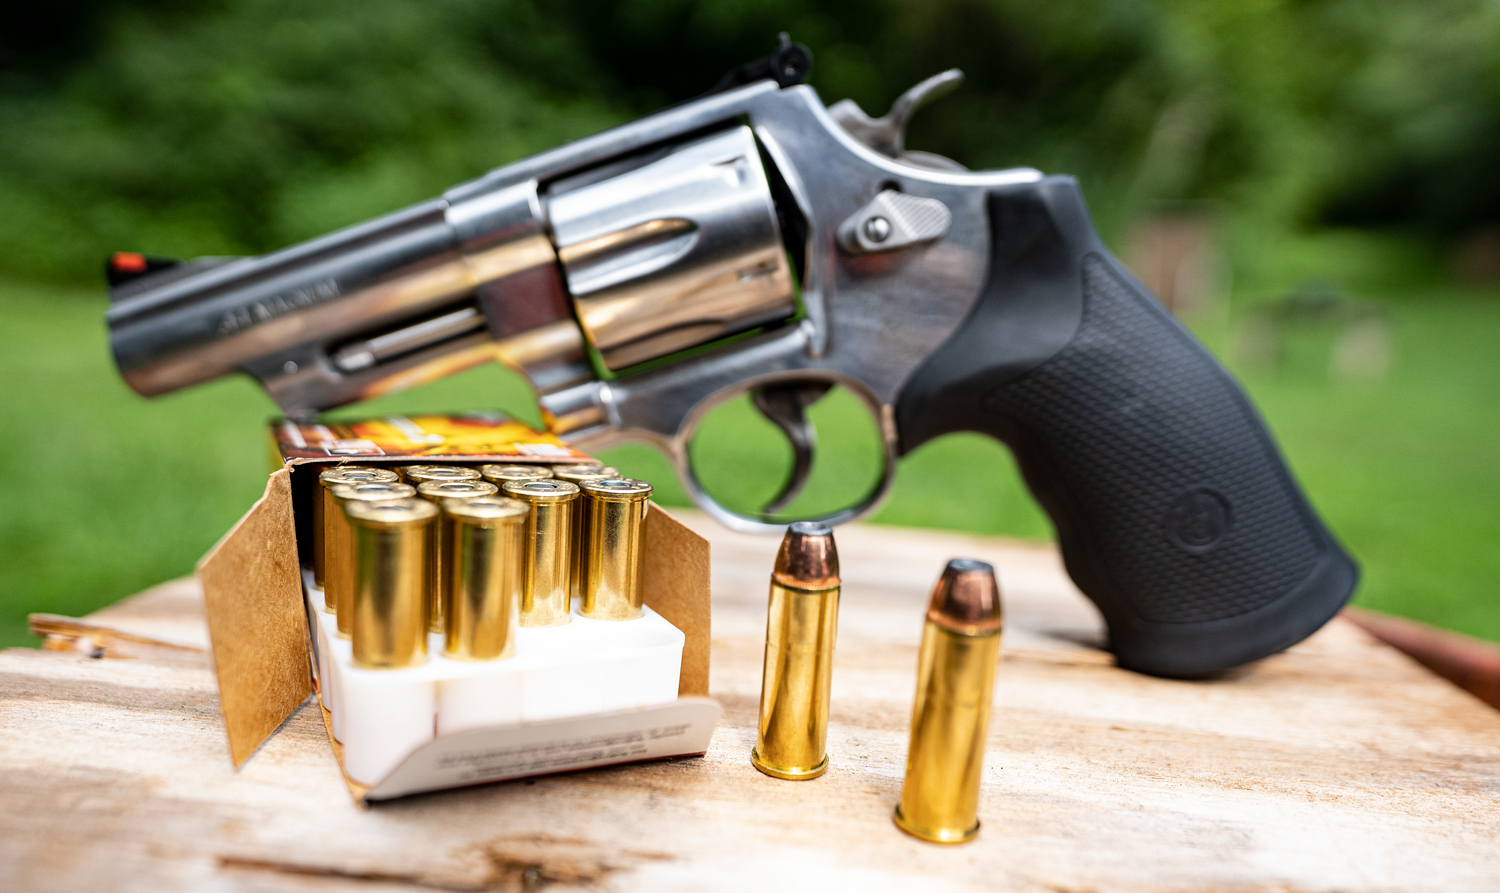 44 magnum revolver with ammunition at a shooting range